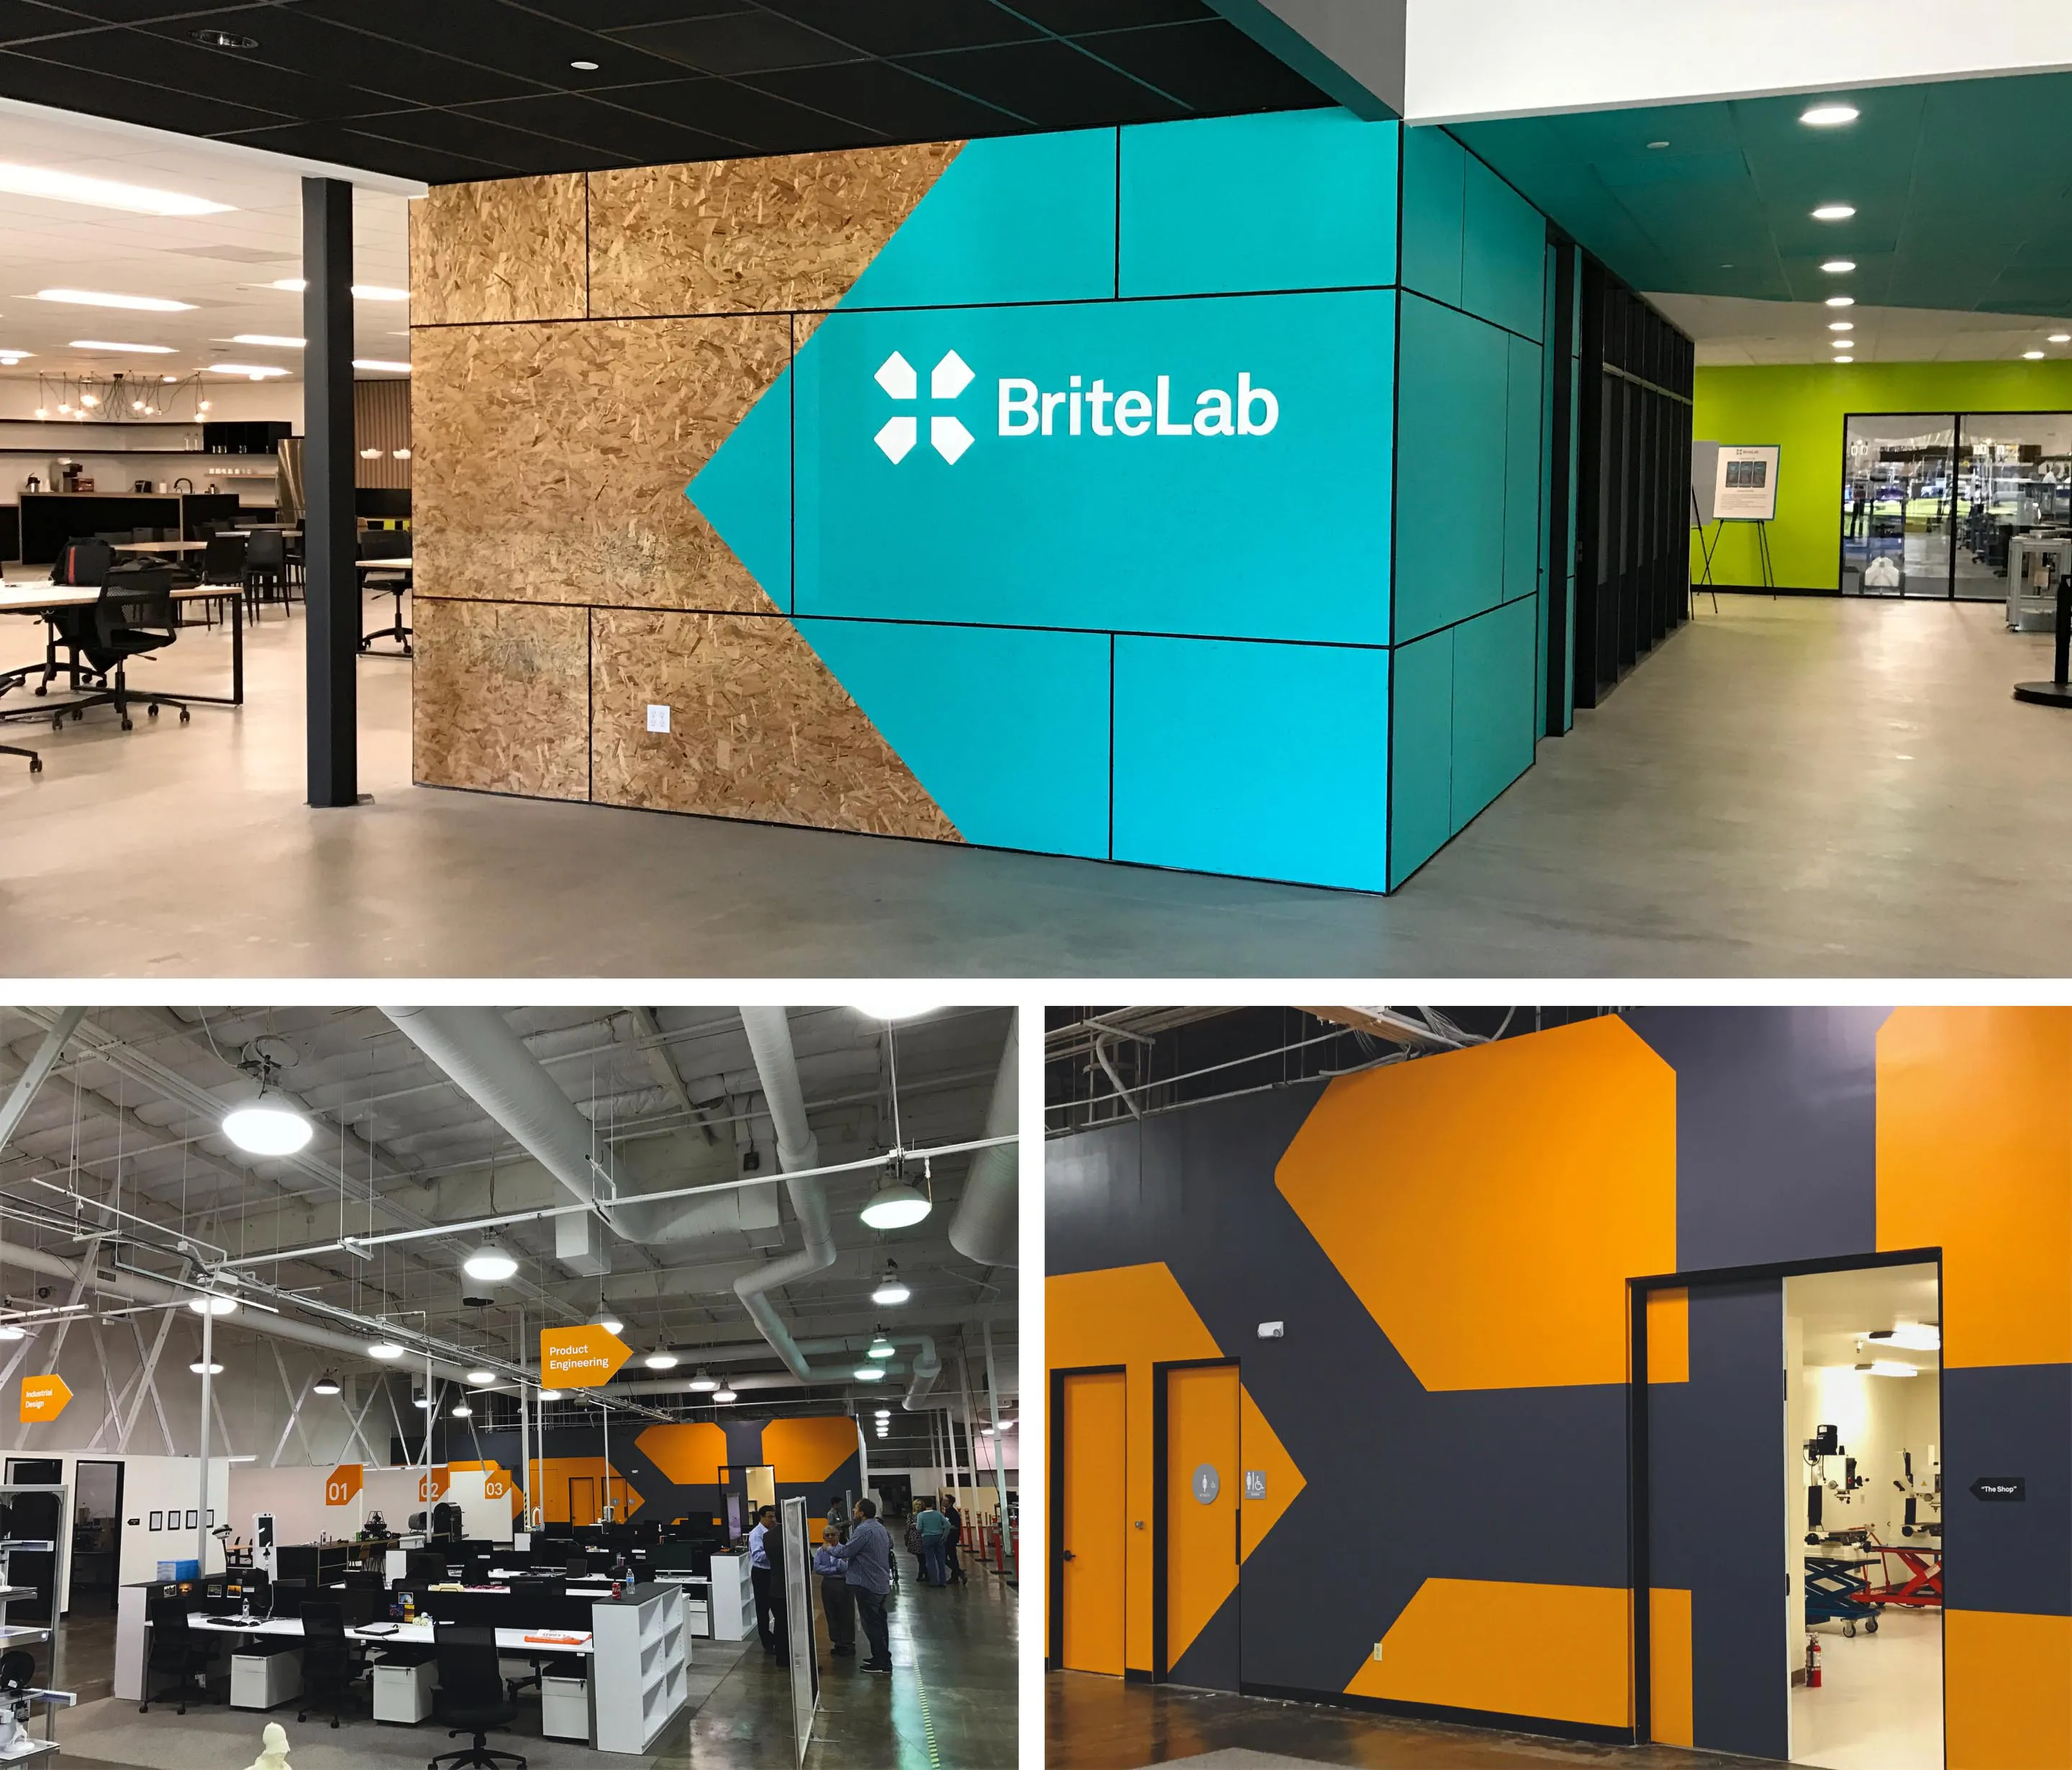 Image showing branded interior of the BriteLab facilities